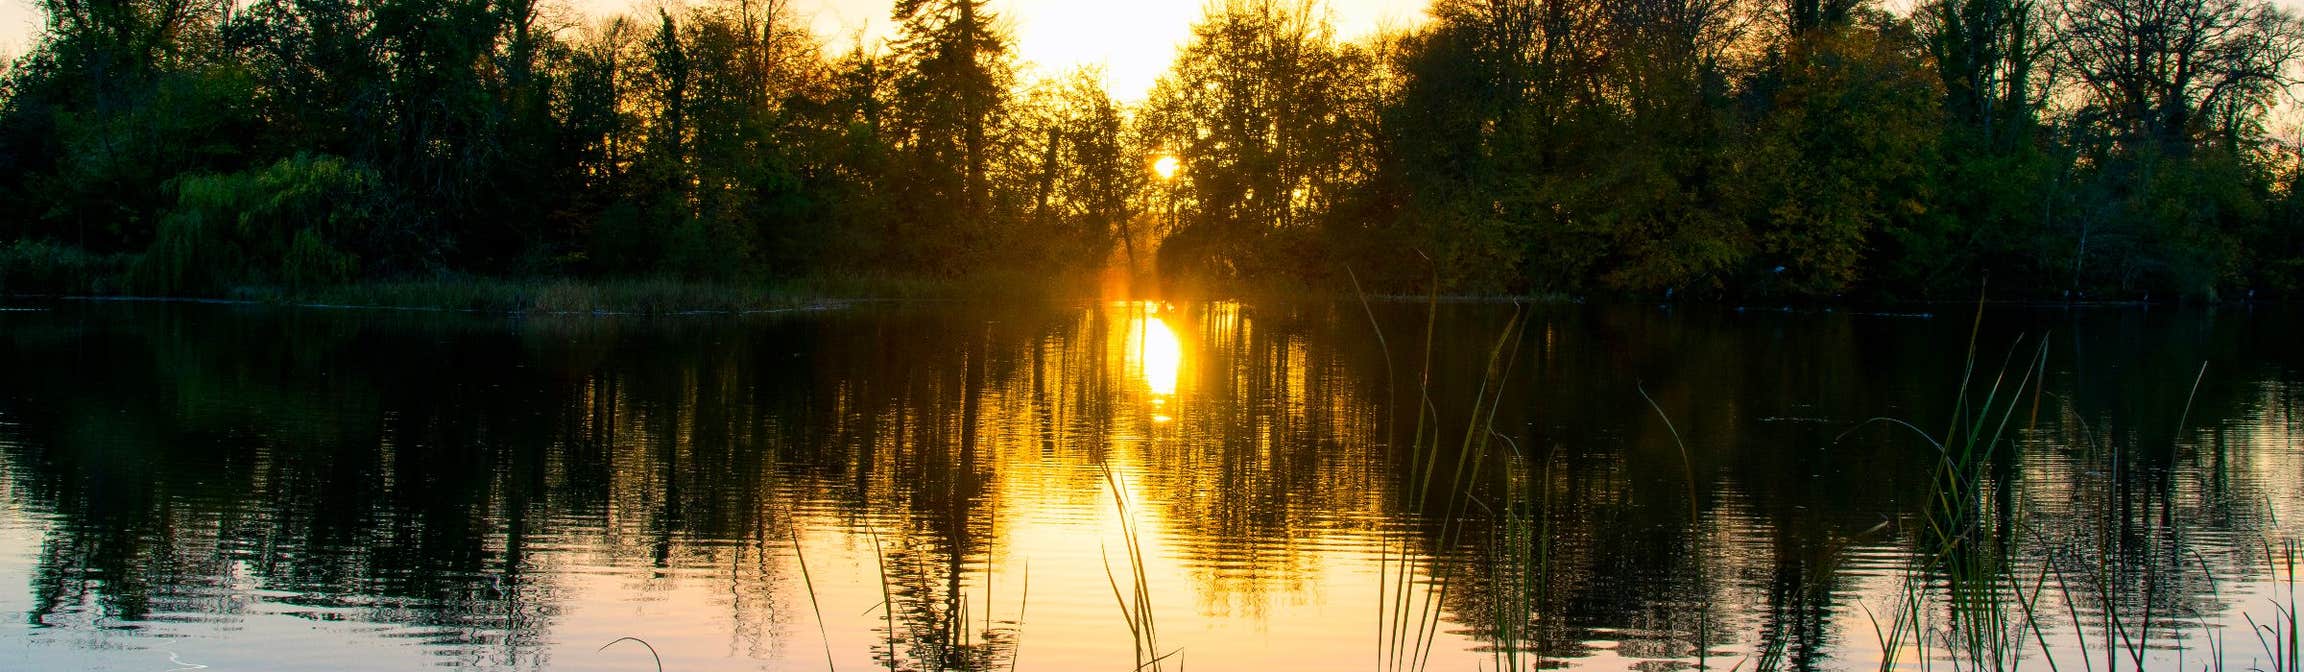 Image of a sunset over a lake in county Offaly